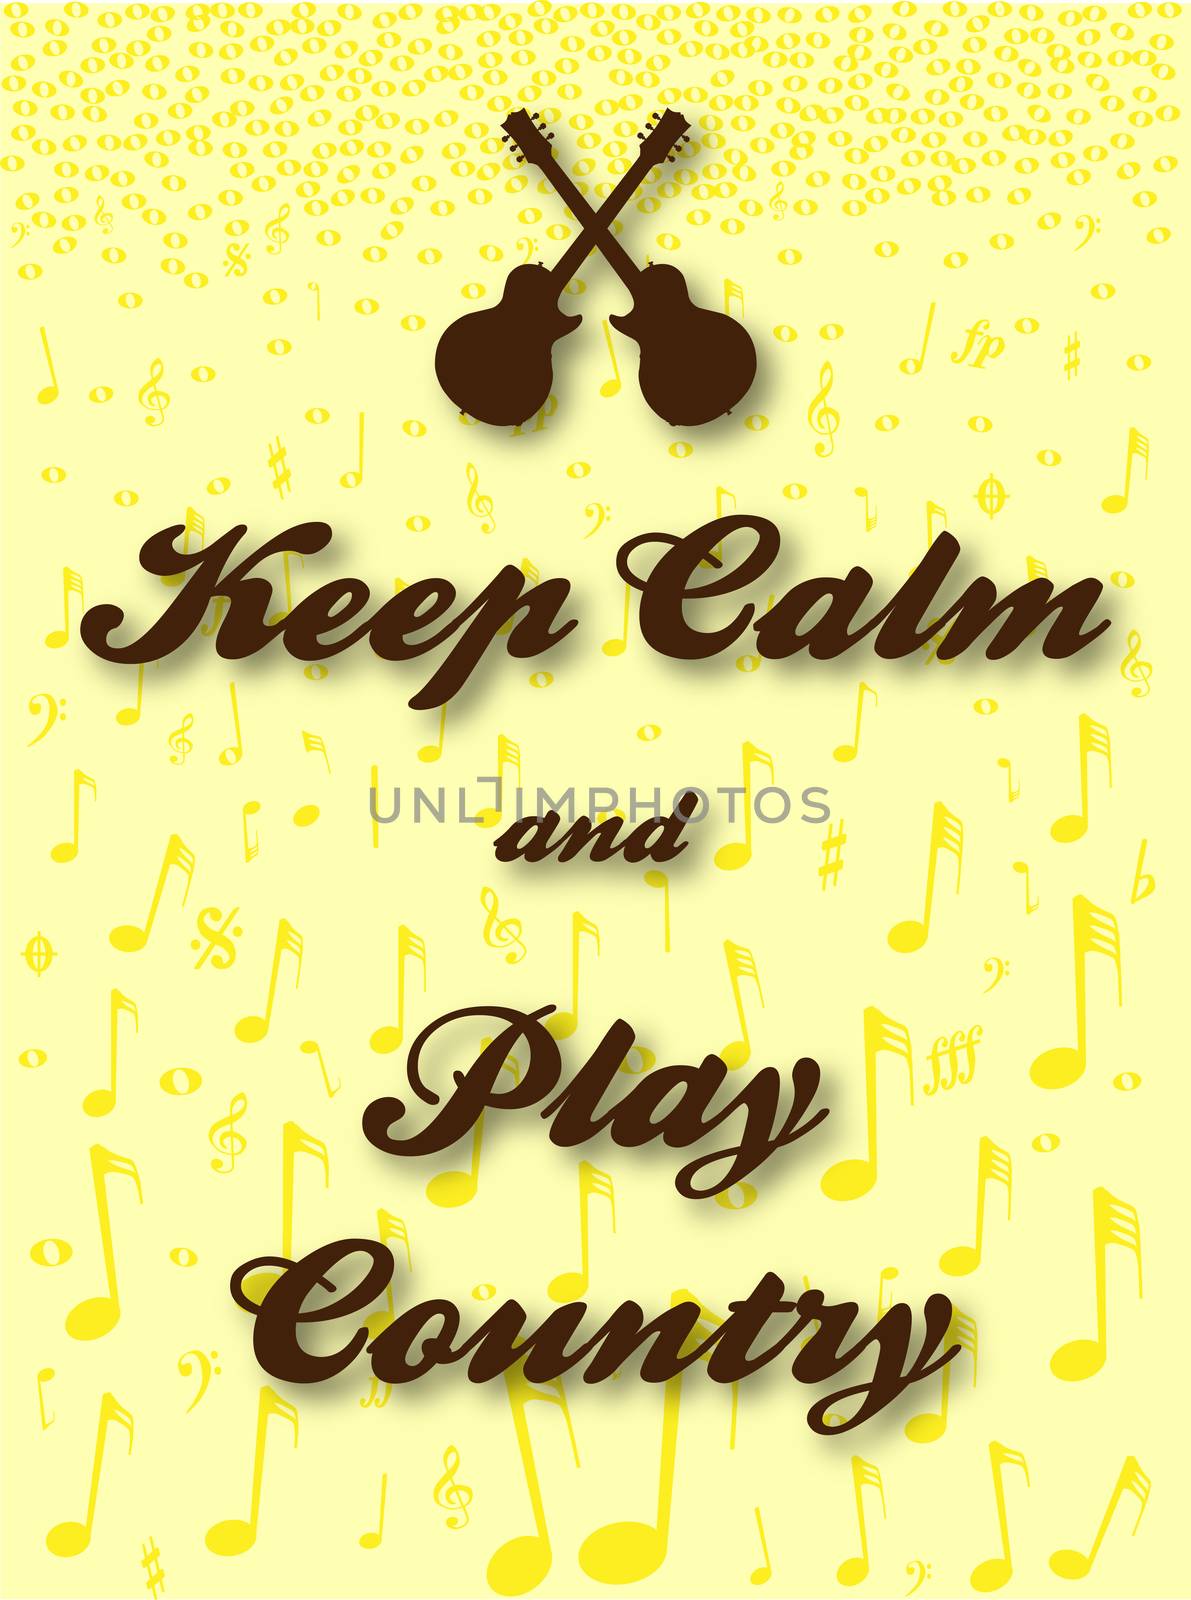 Keep Calm guitar and country music background poster